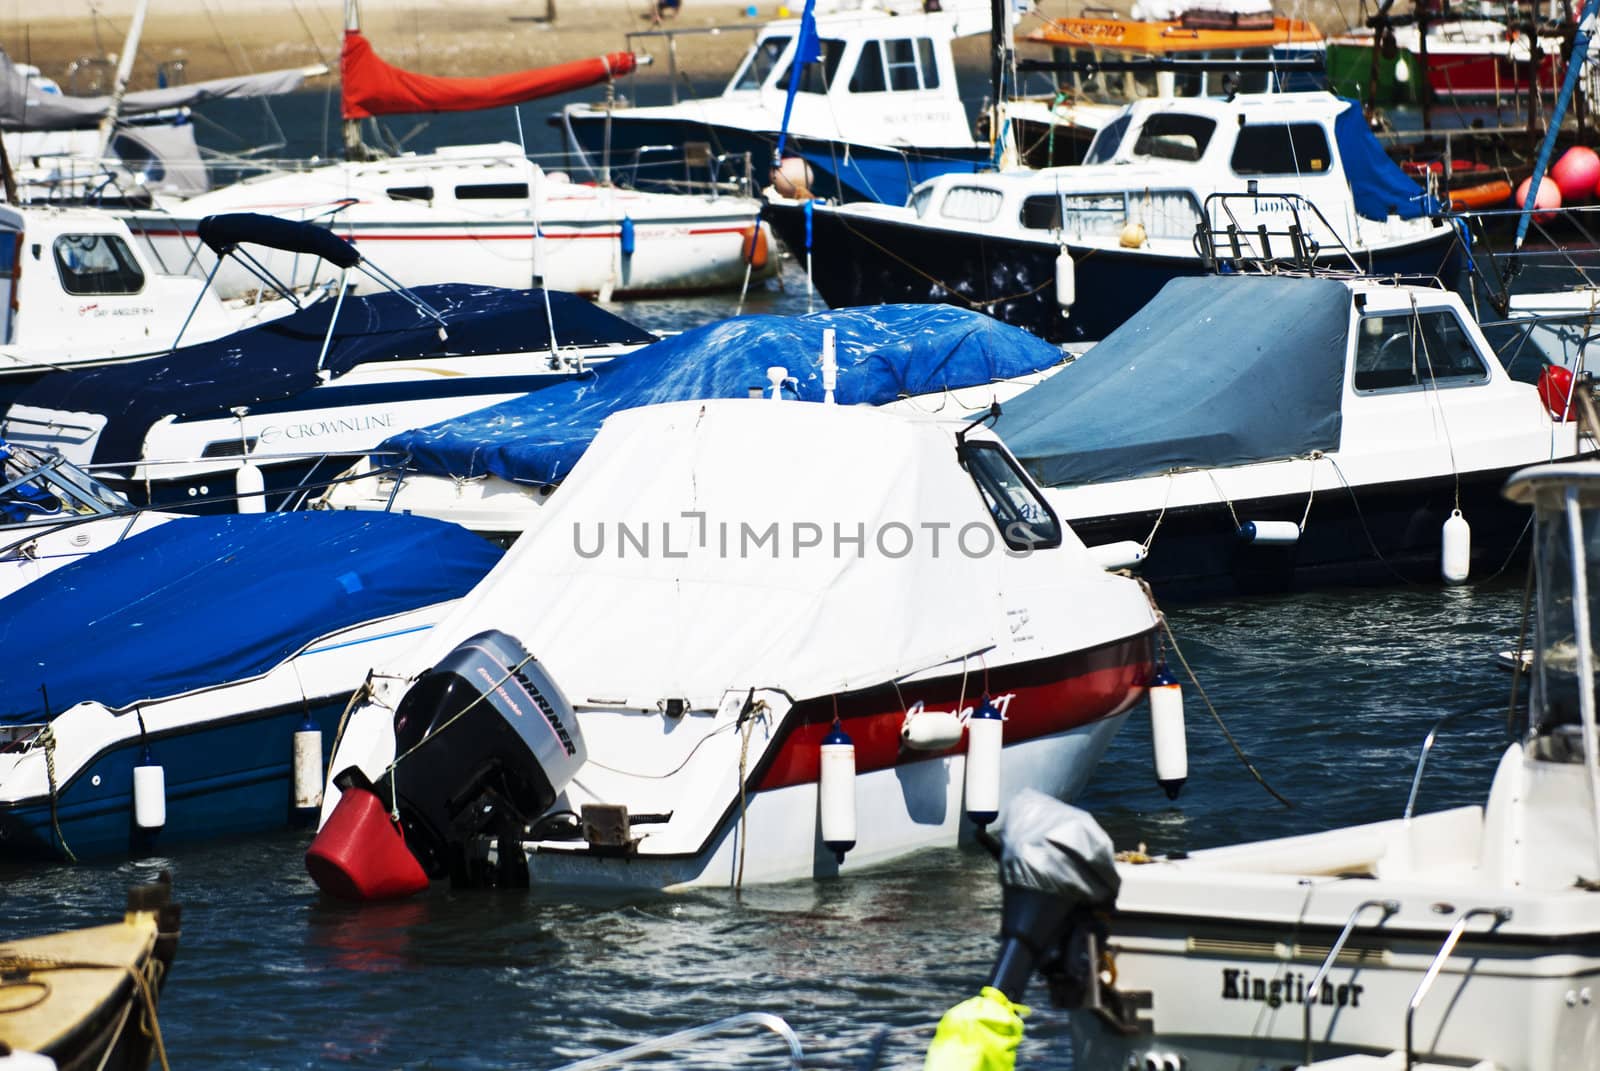 Small boats in Lyme Regis Harbour by itsrich